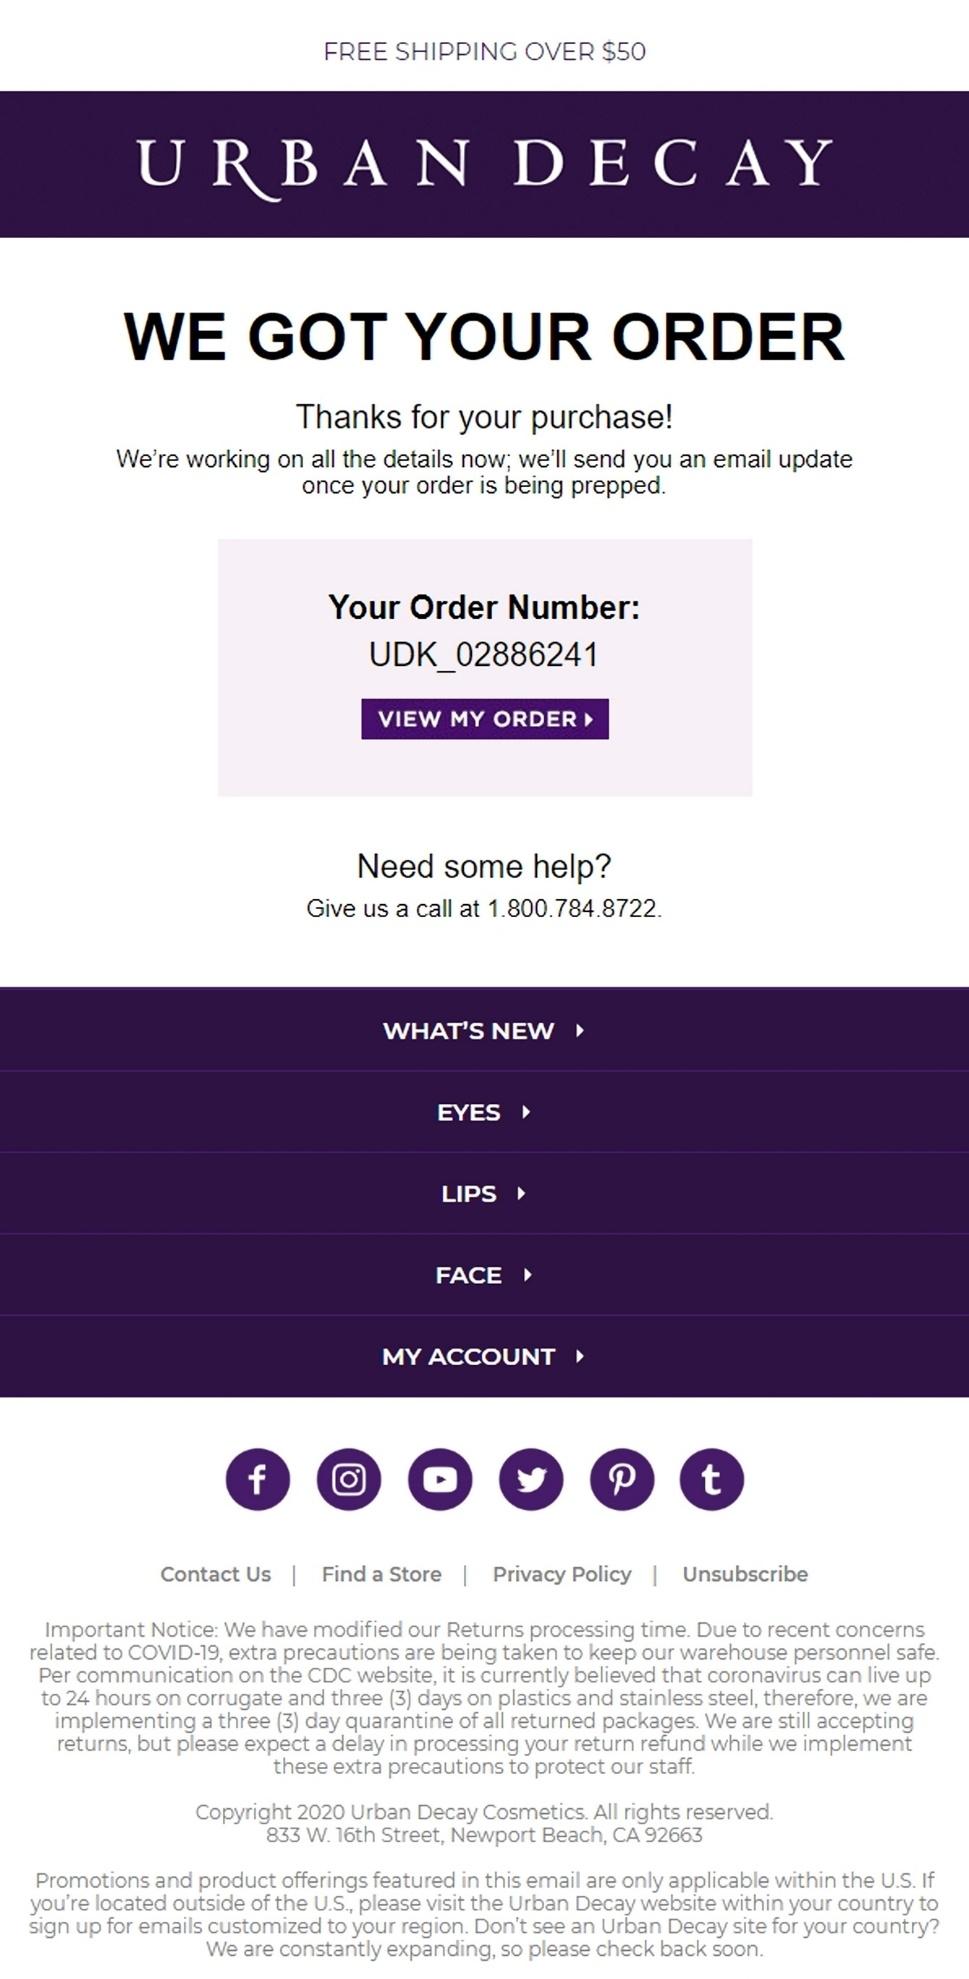 Urban Decay transactional email